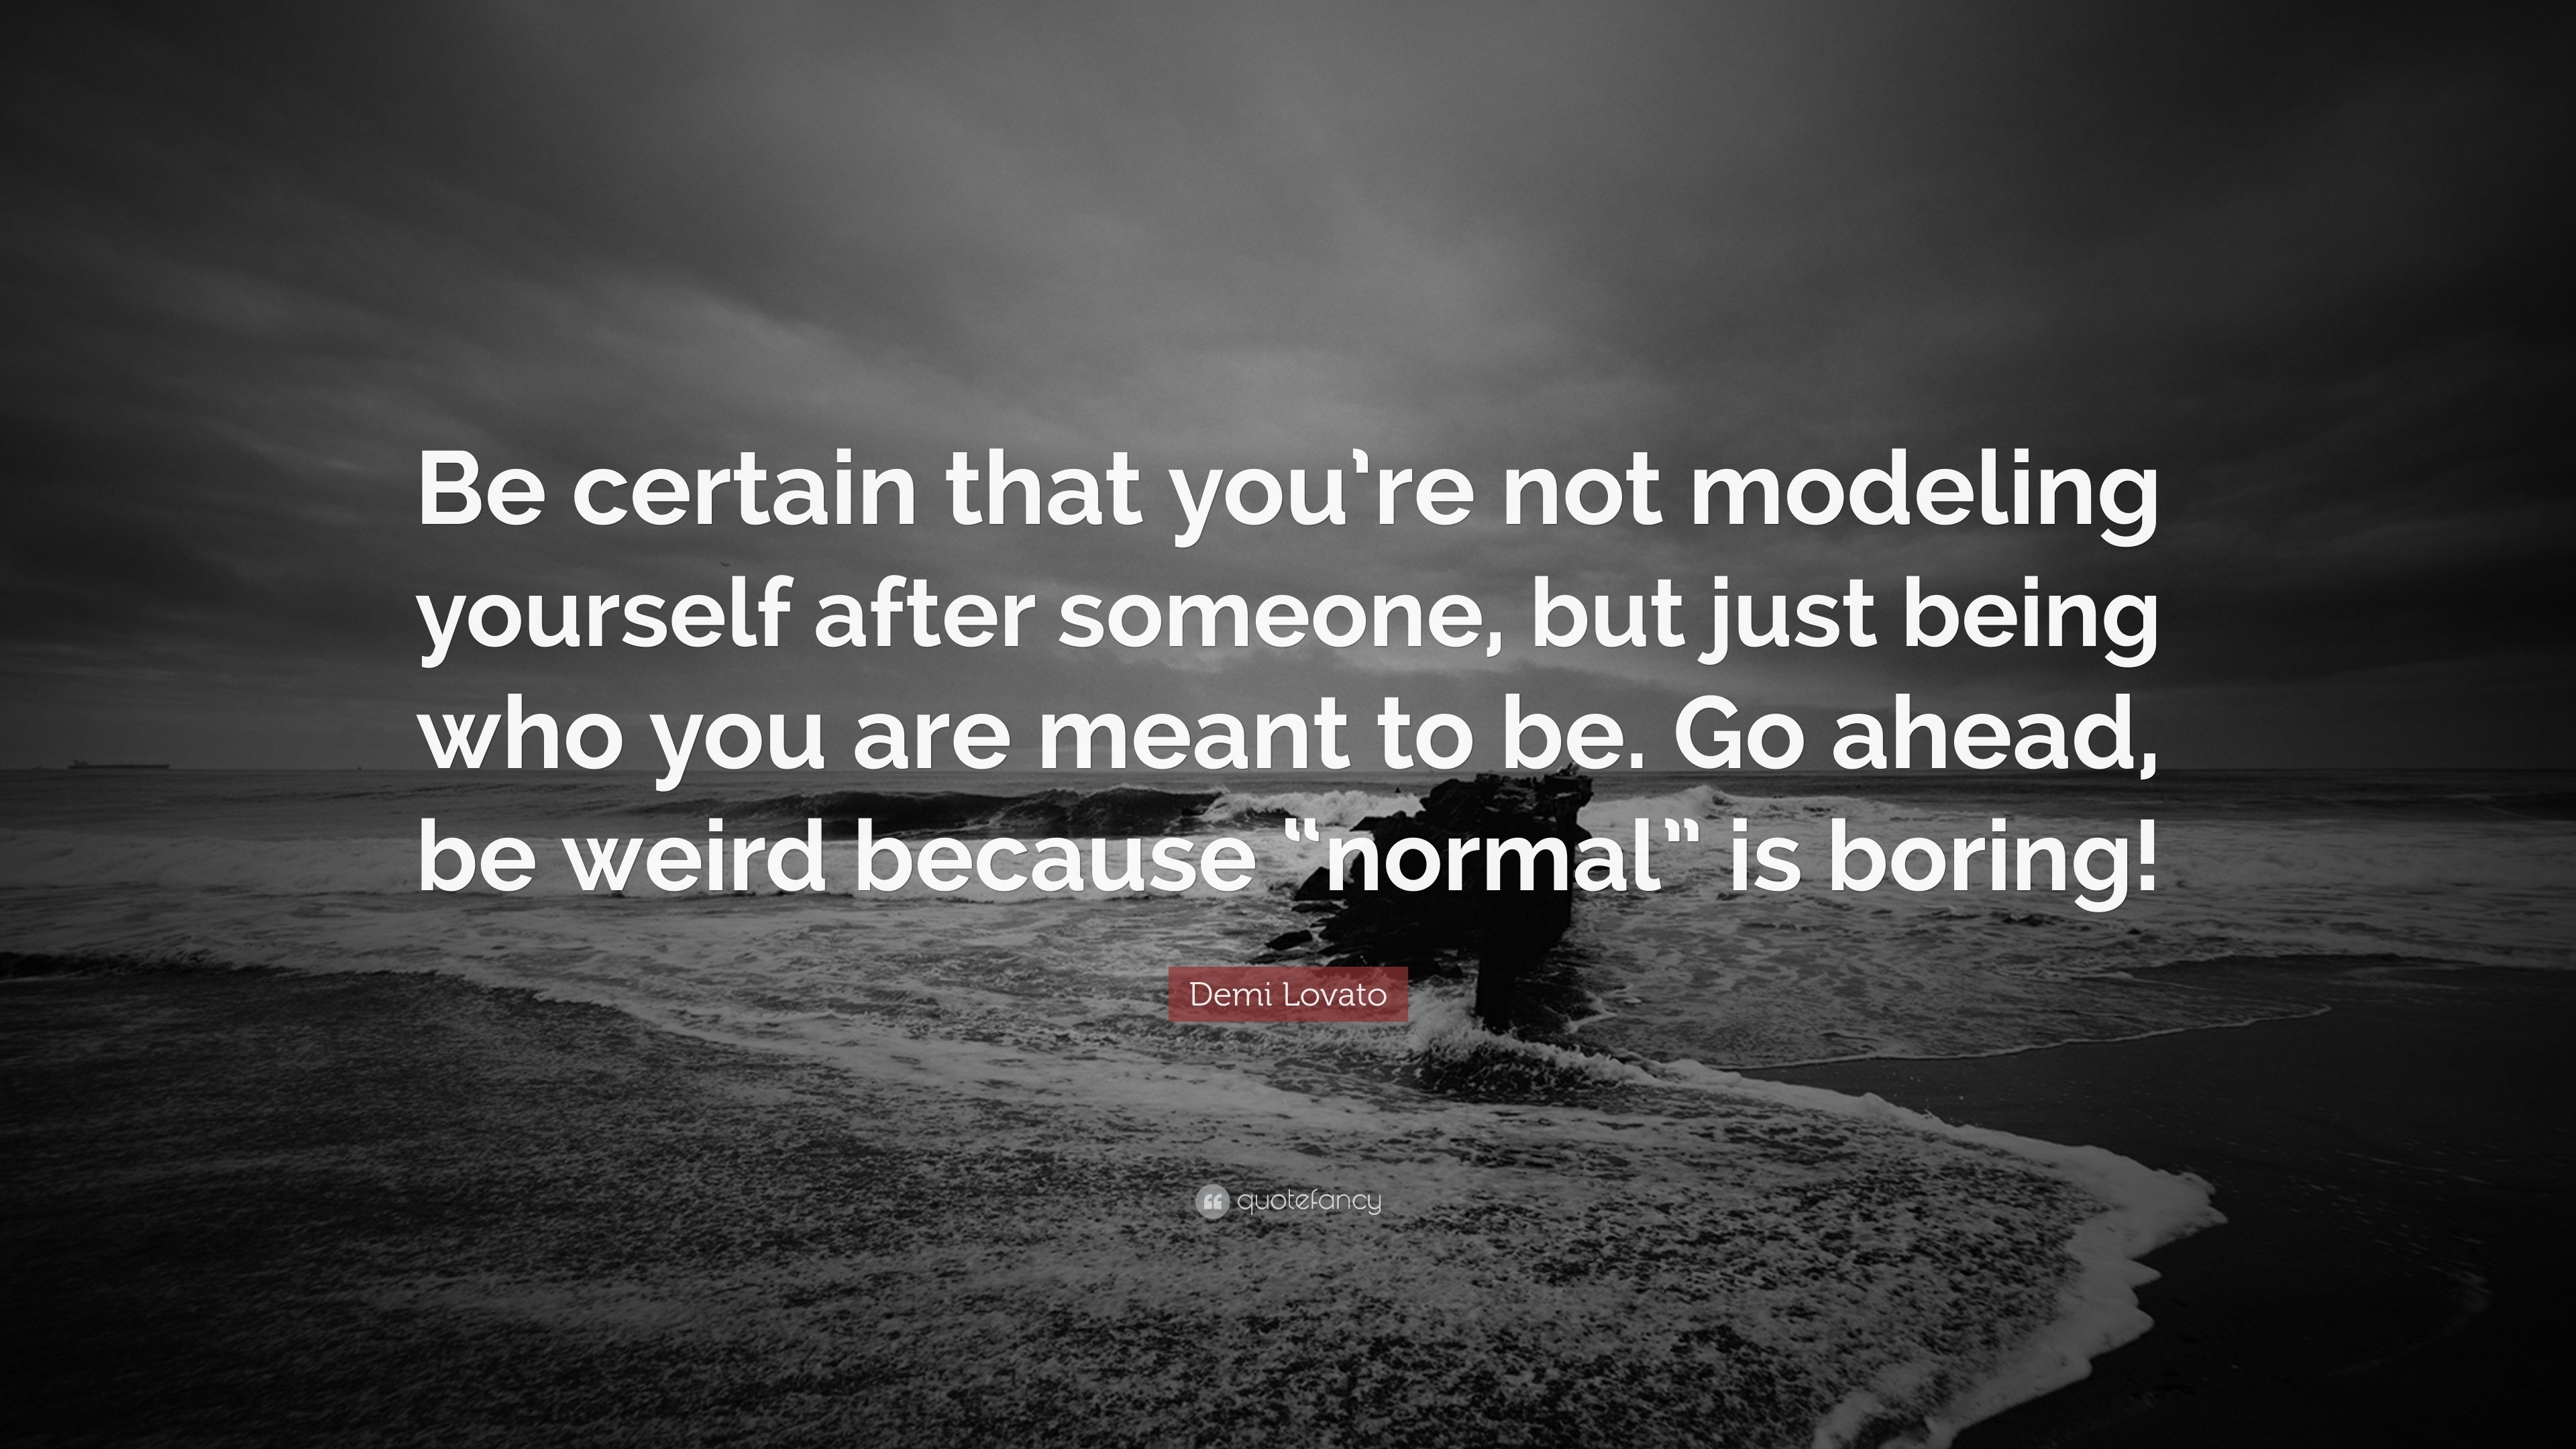 Demi Lovato Quote: “Be certain that you're not modeling yourself after someone, but just being who you are meant to be. Go ahead, be weird b.” (12 wallpaper)